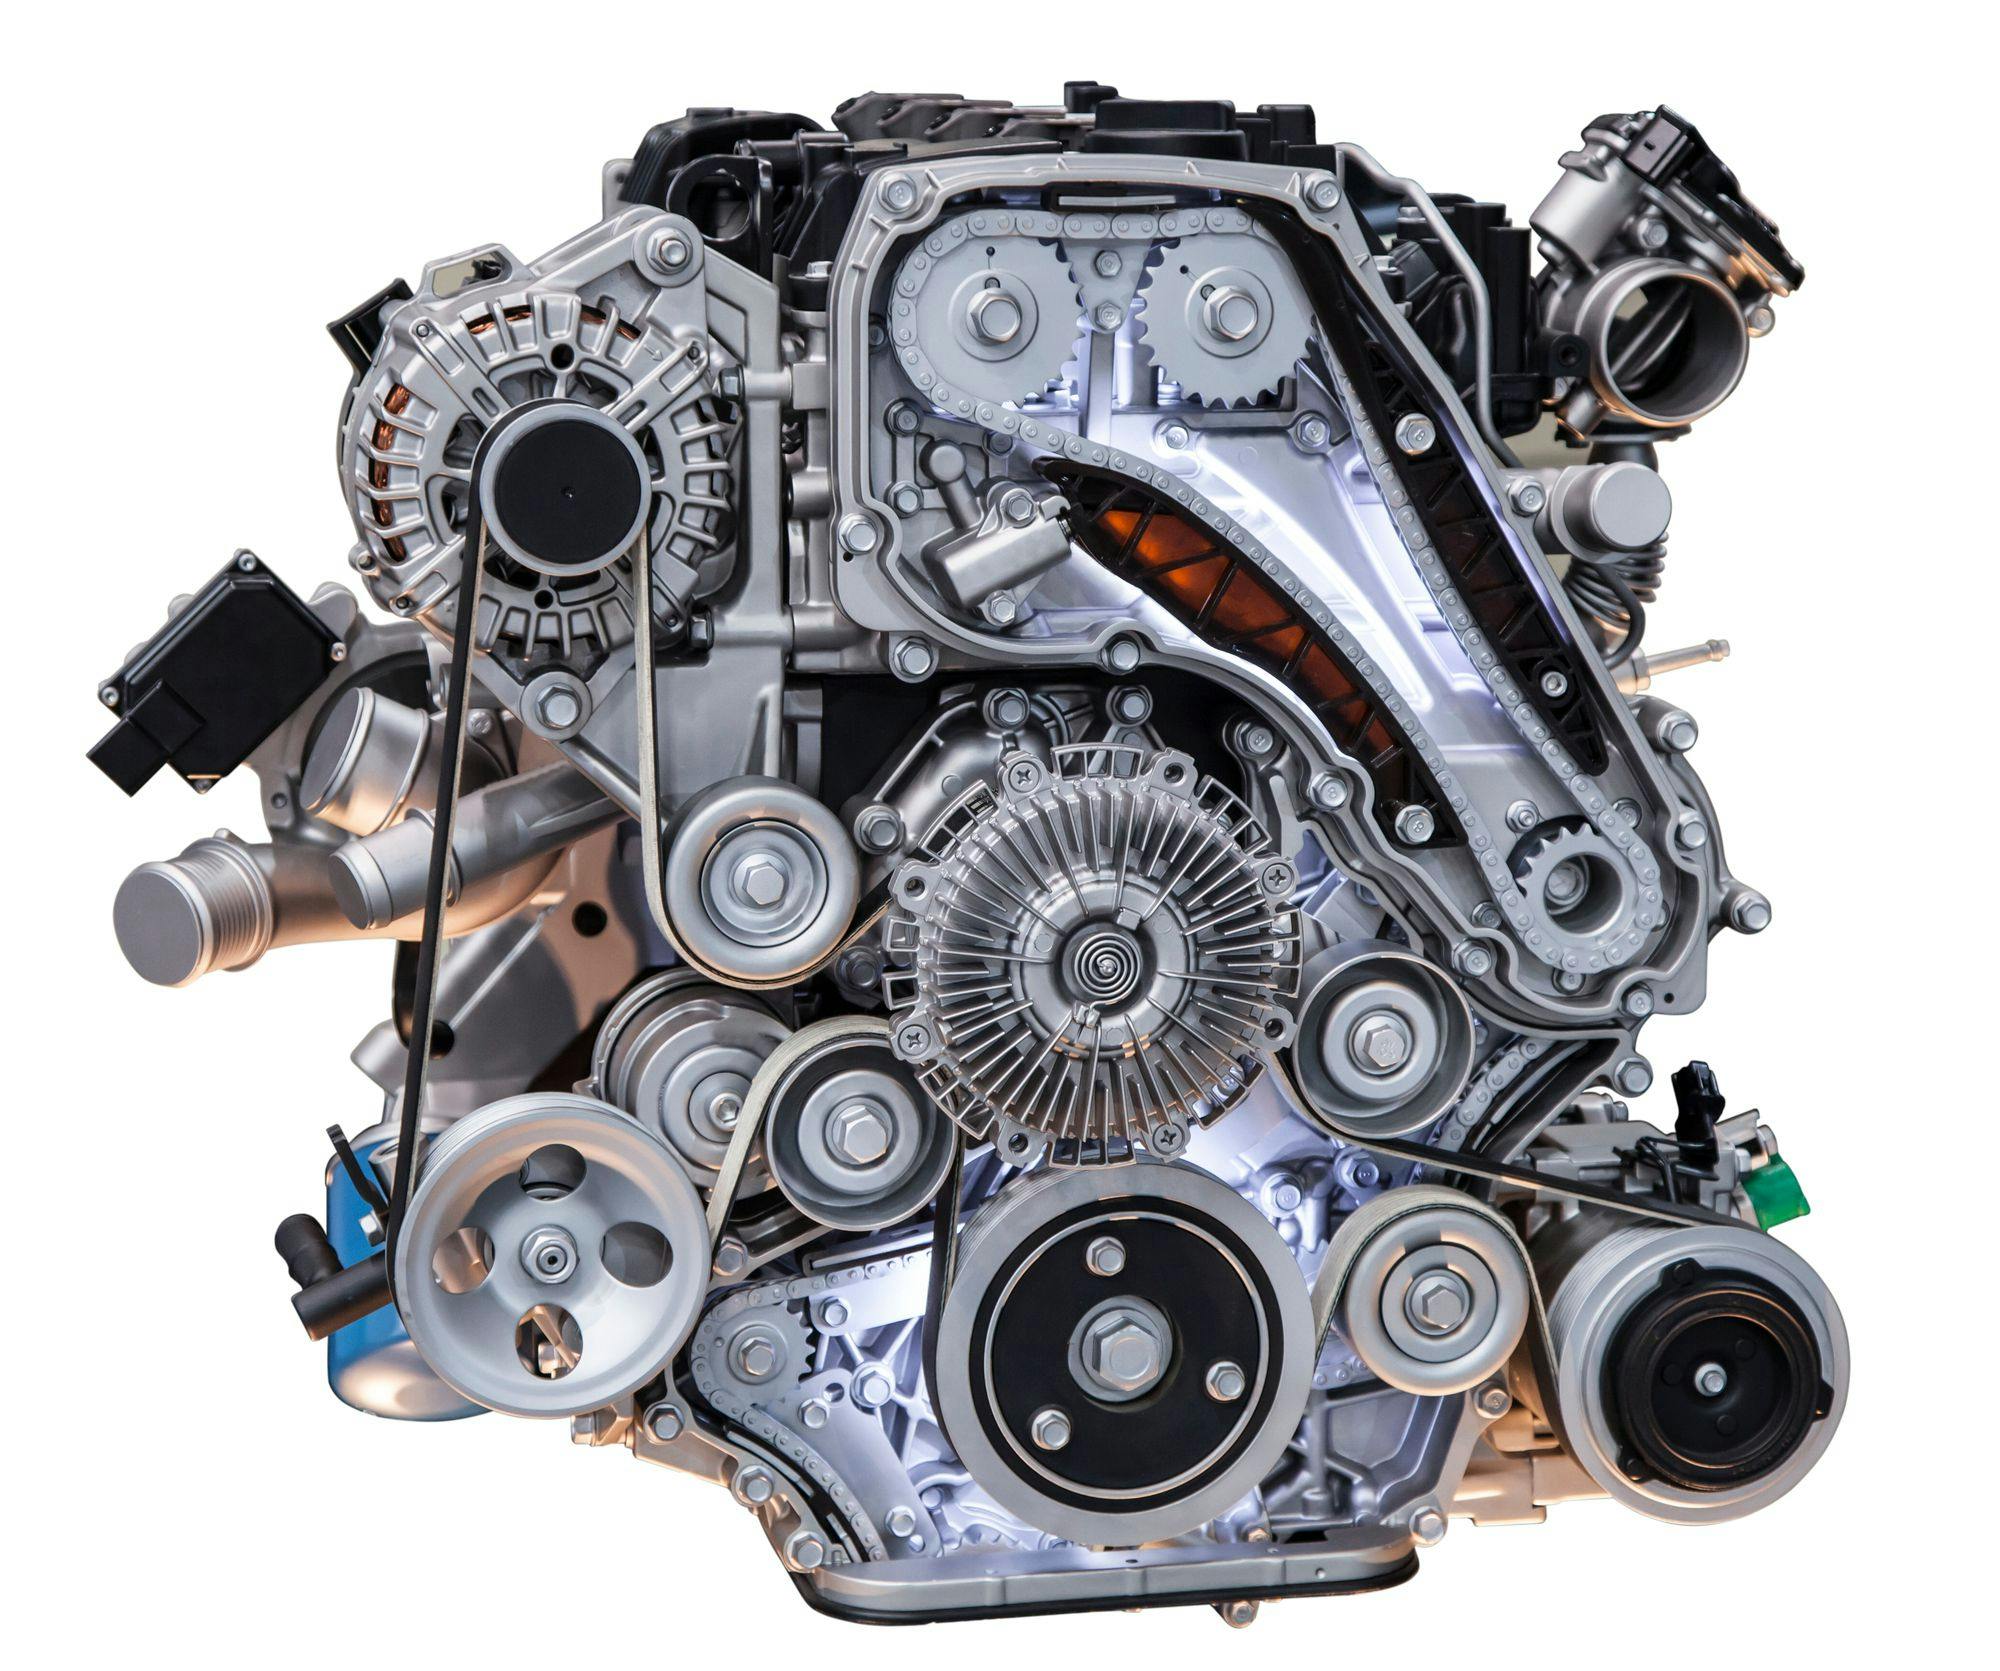 Discover how choosing between engine repair or rebuild affects your diesel truck's performance. Make informed decisions for optimal vehicle health.